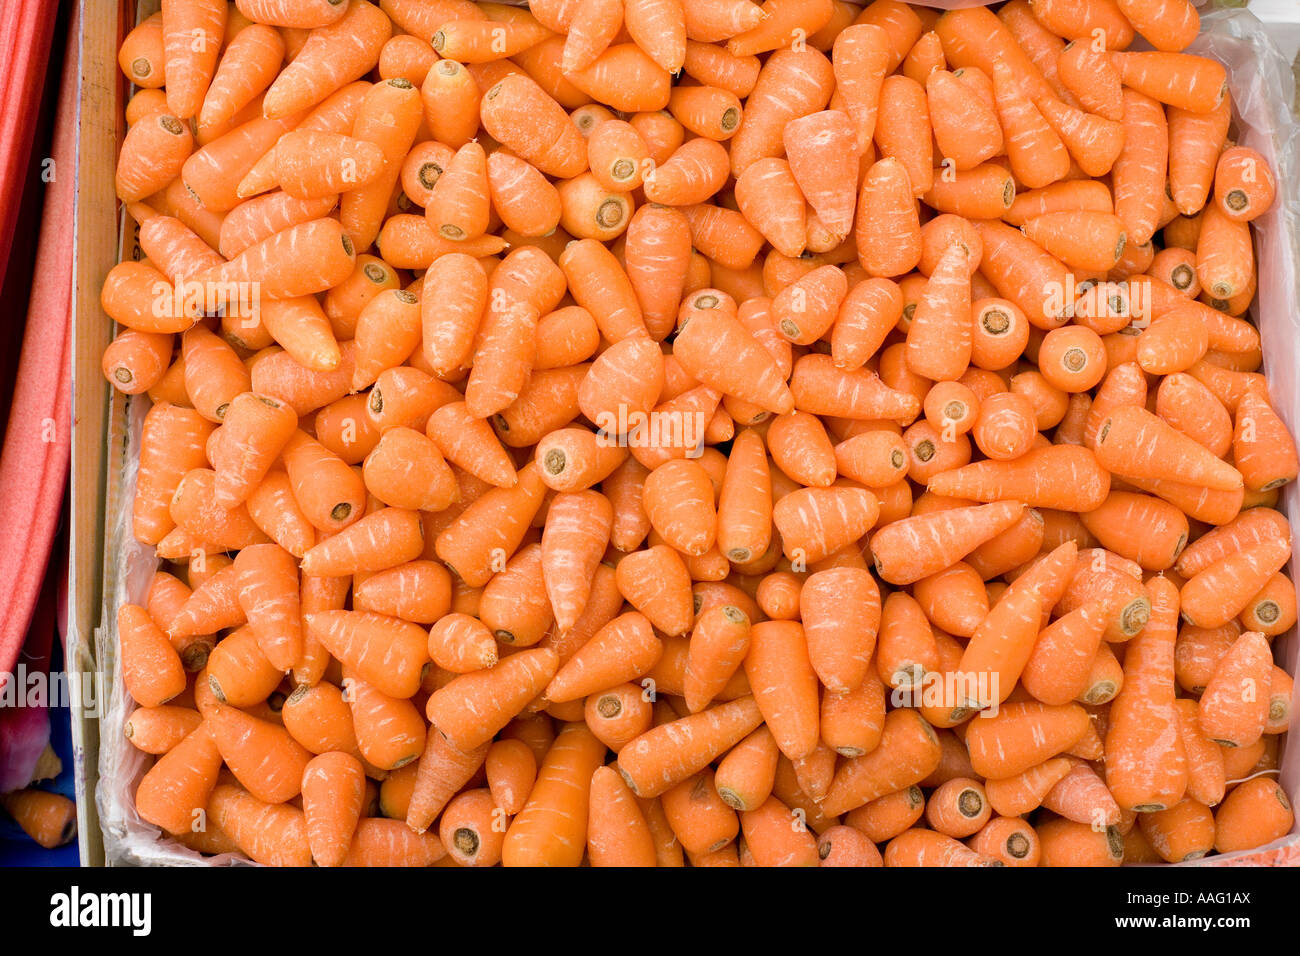 Carrots for sale in a Borough market, London Stock Photo